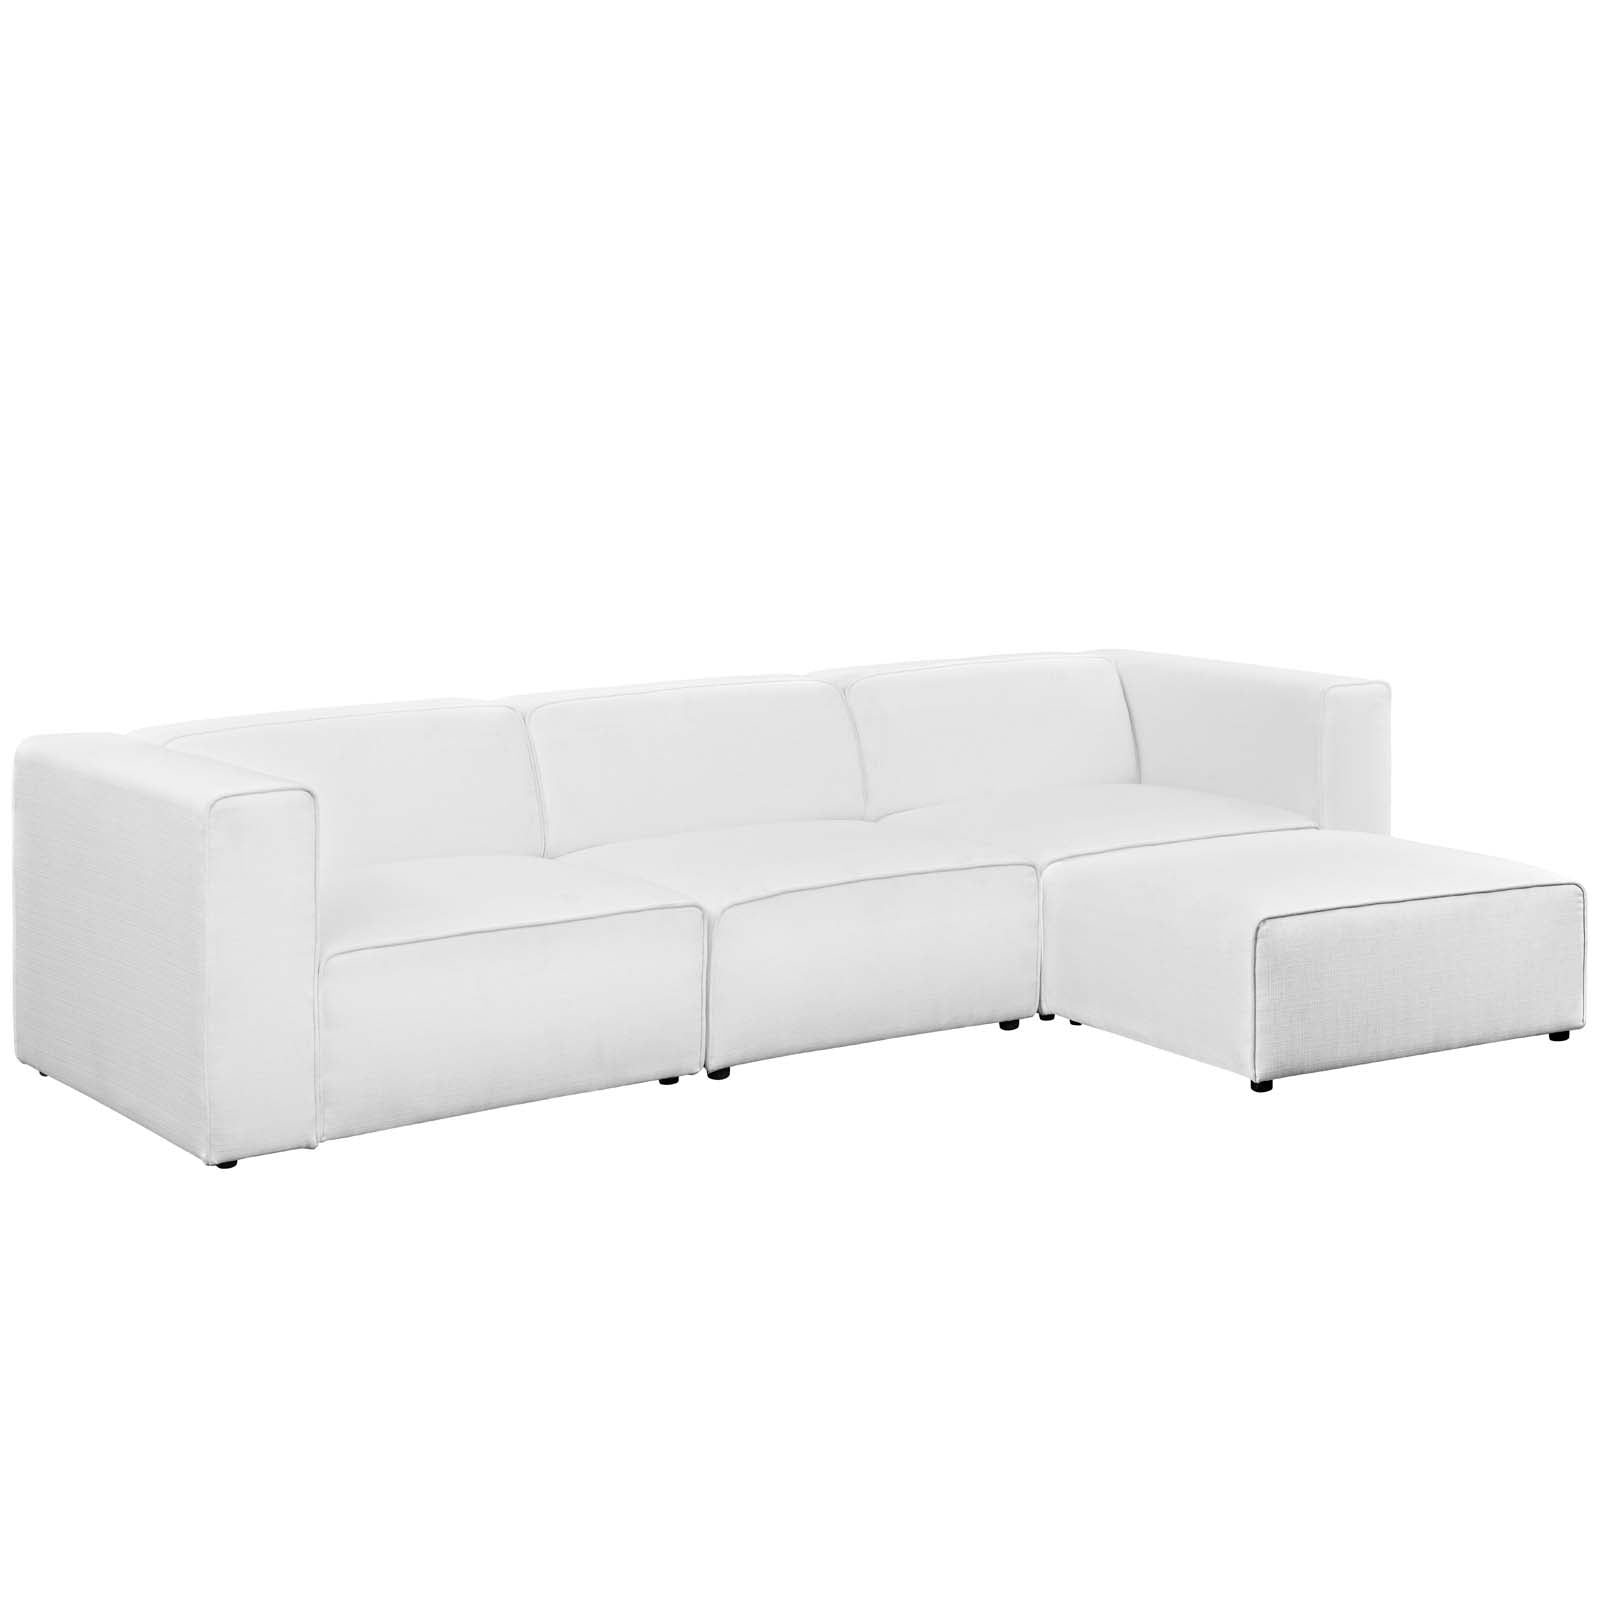 Modway Sectional Sofas - Mingle Upholstered Reversible Sectional Sofa White